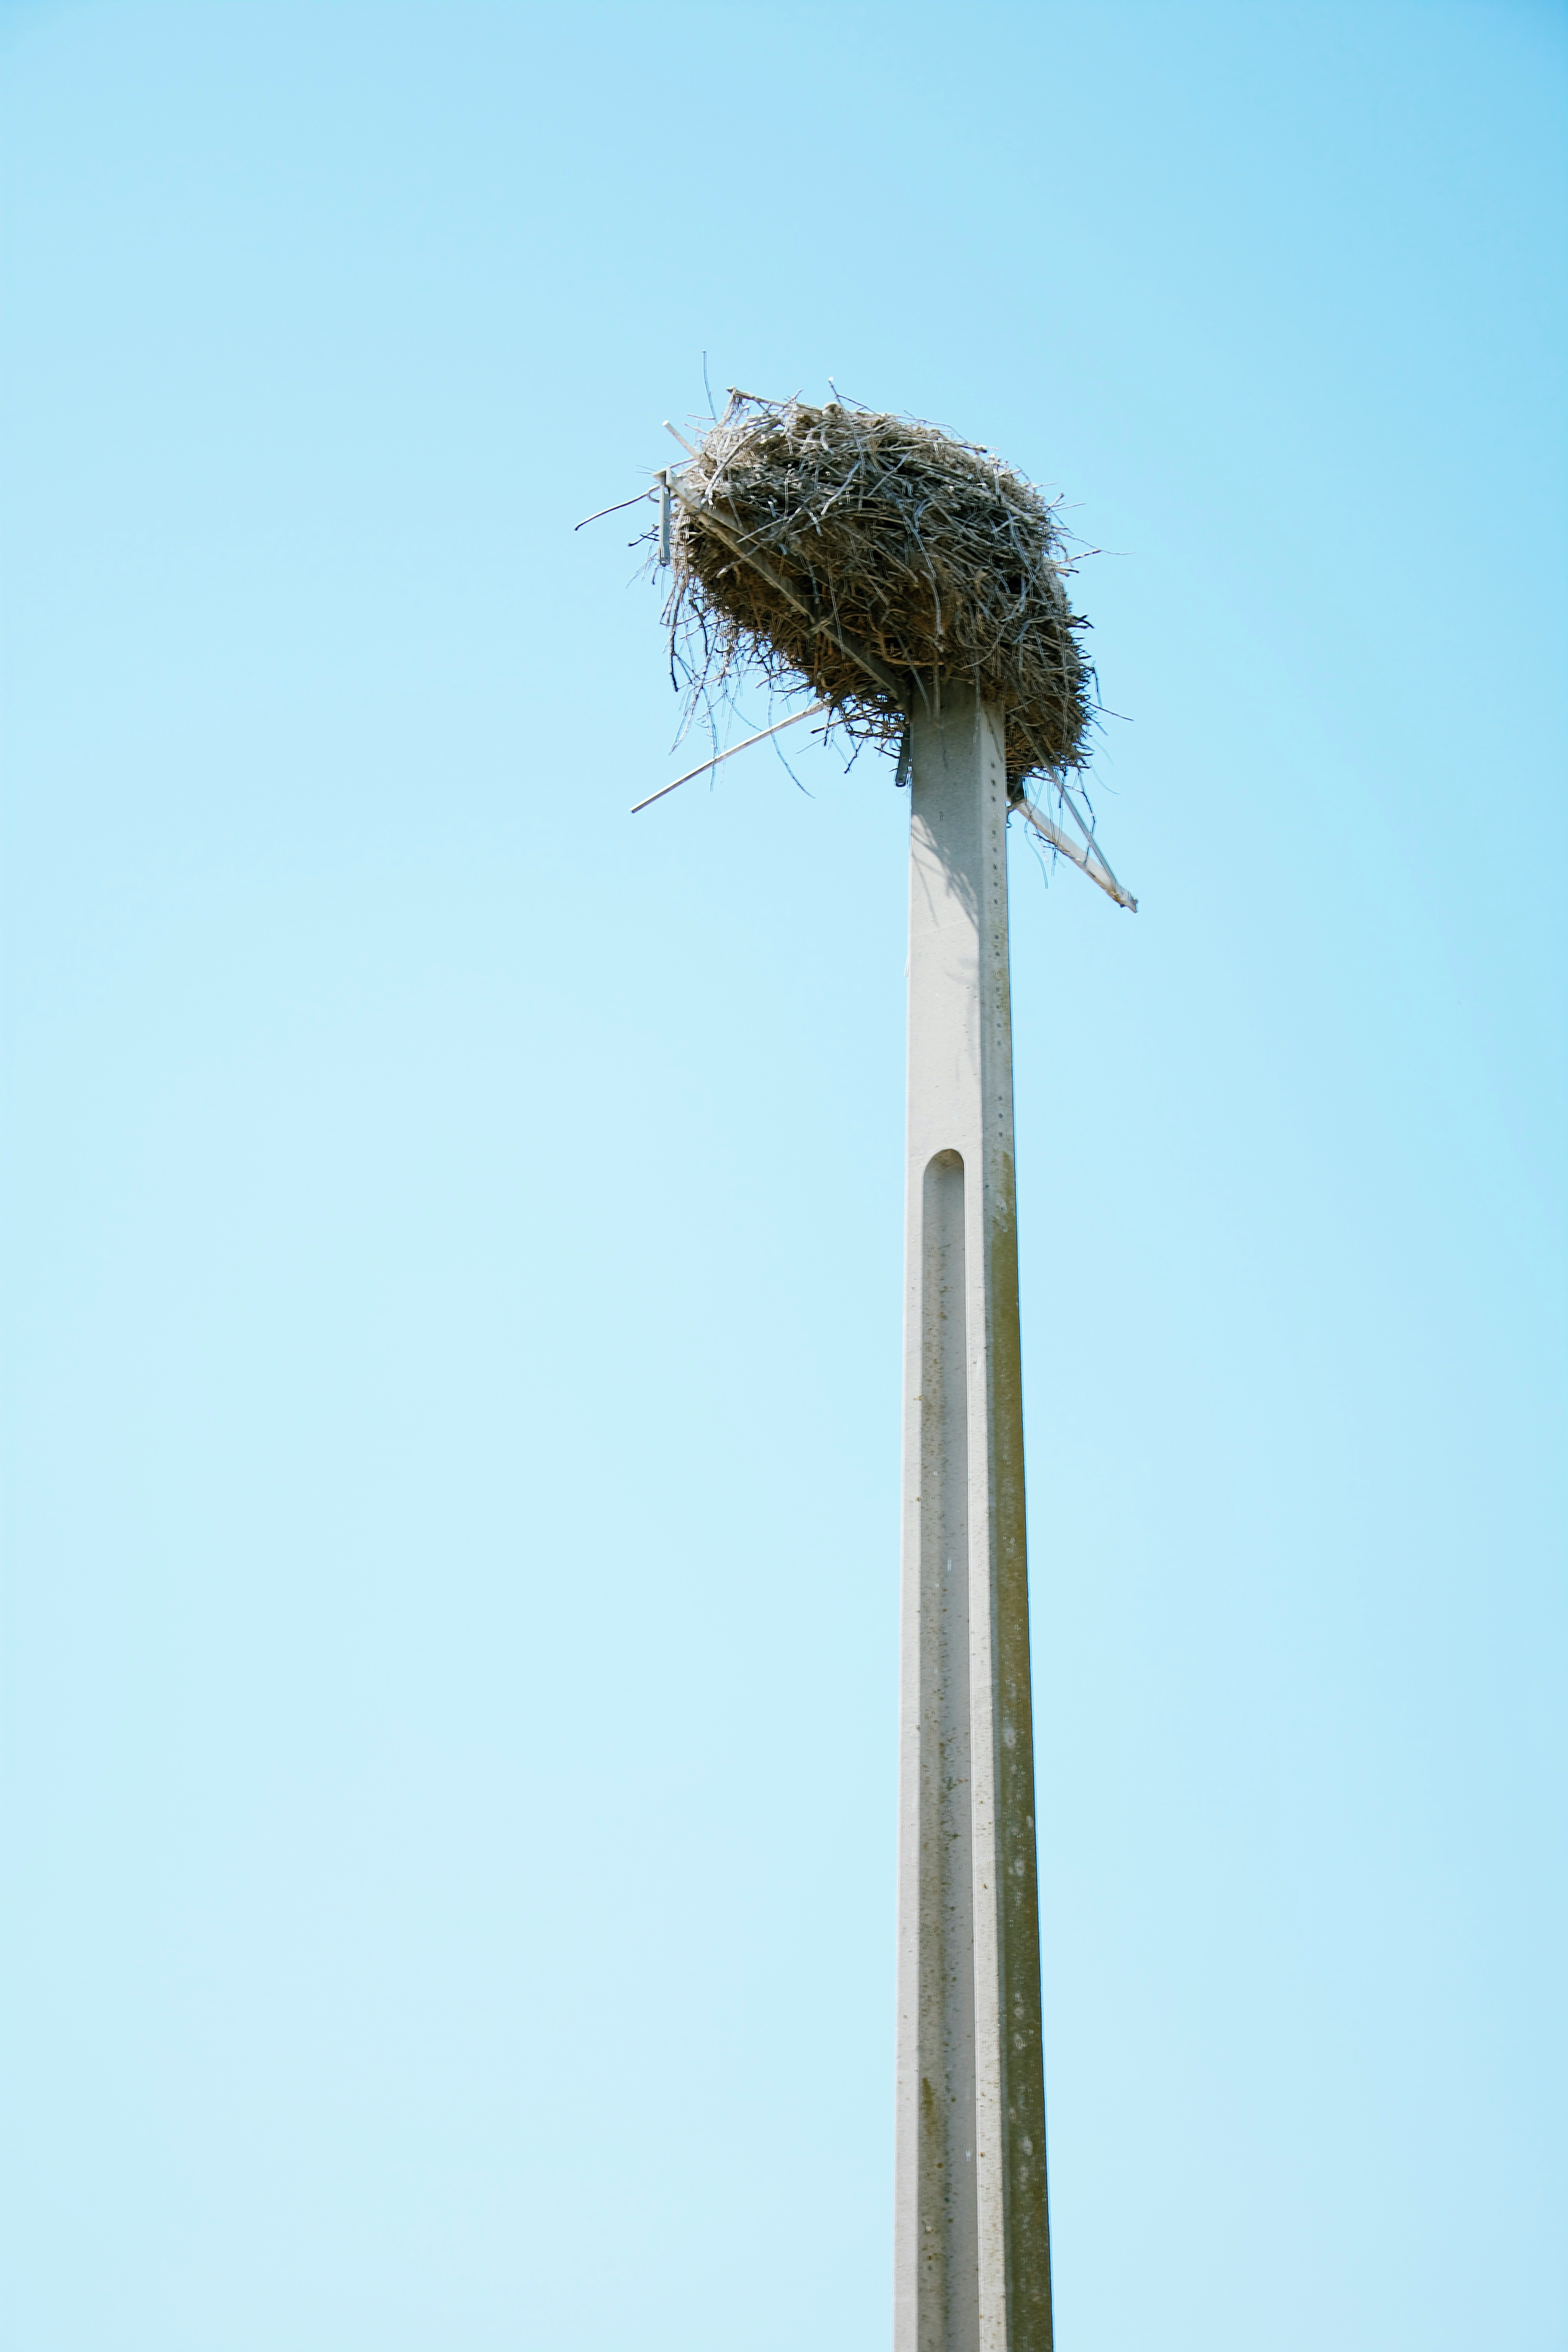 nest on top of pole